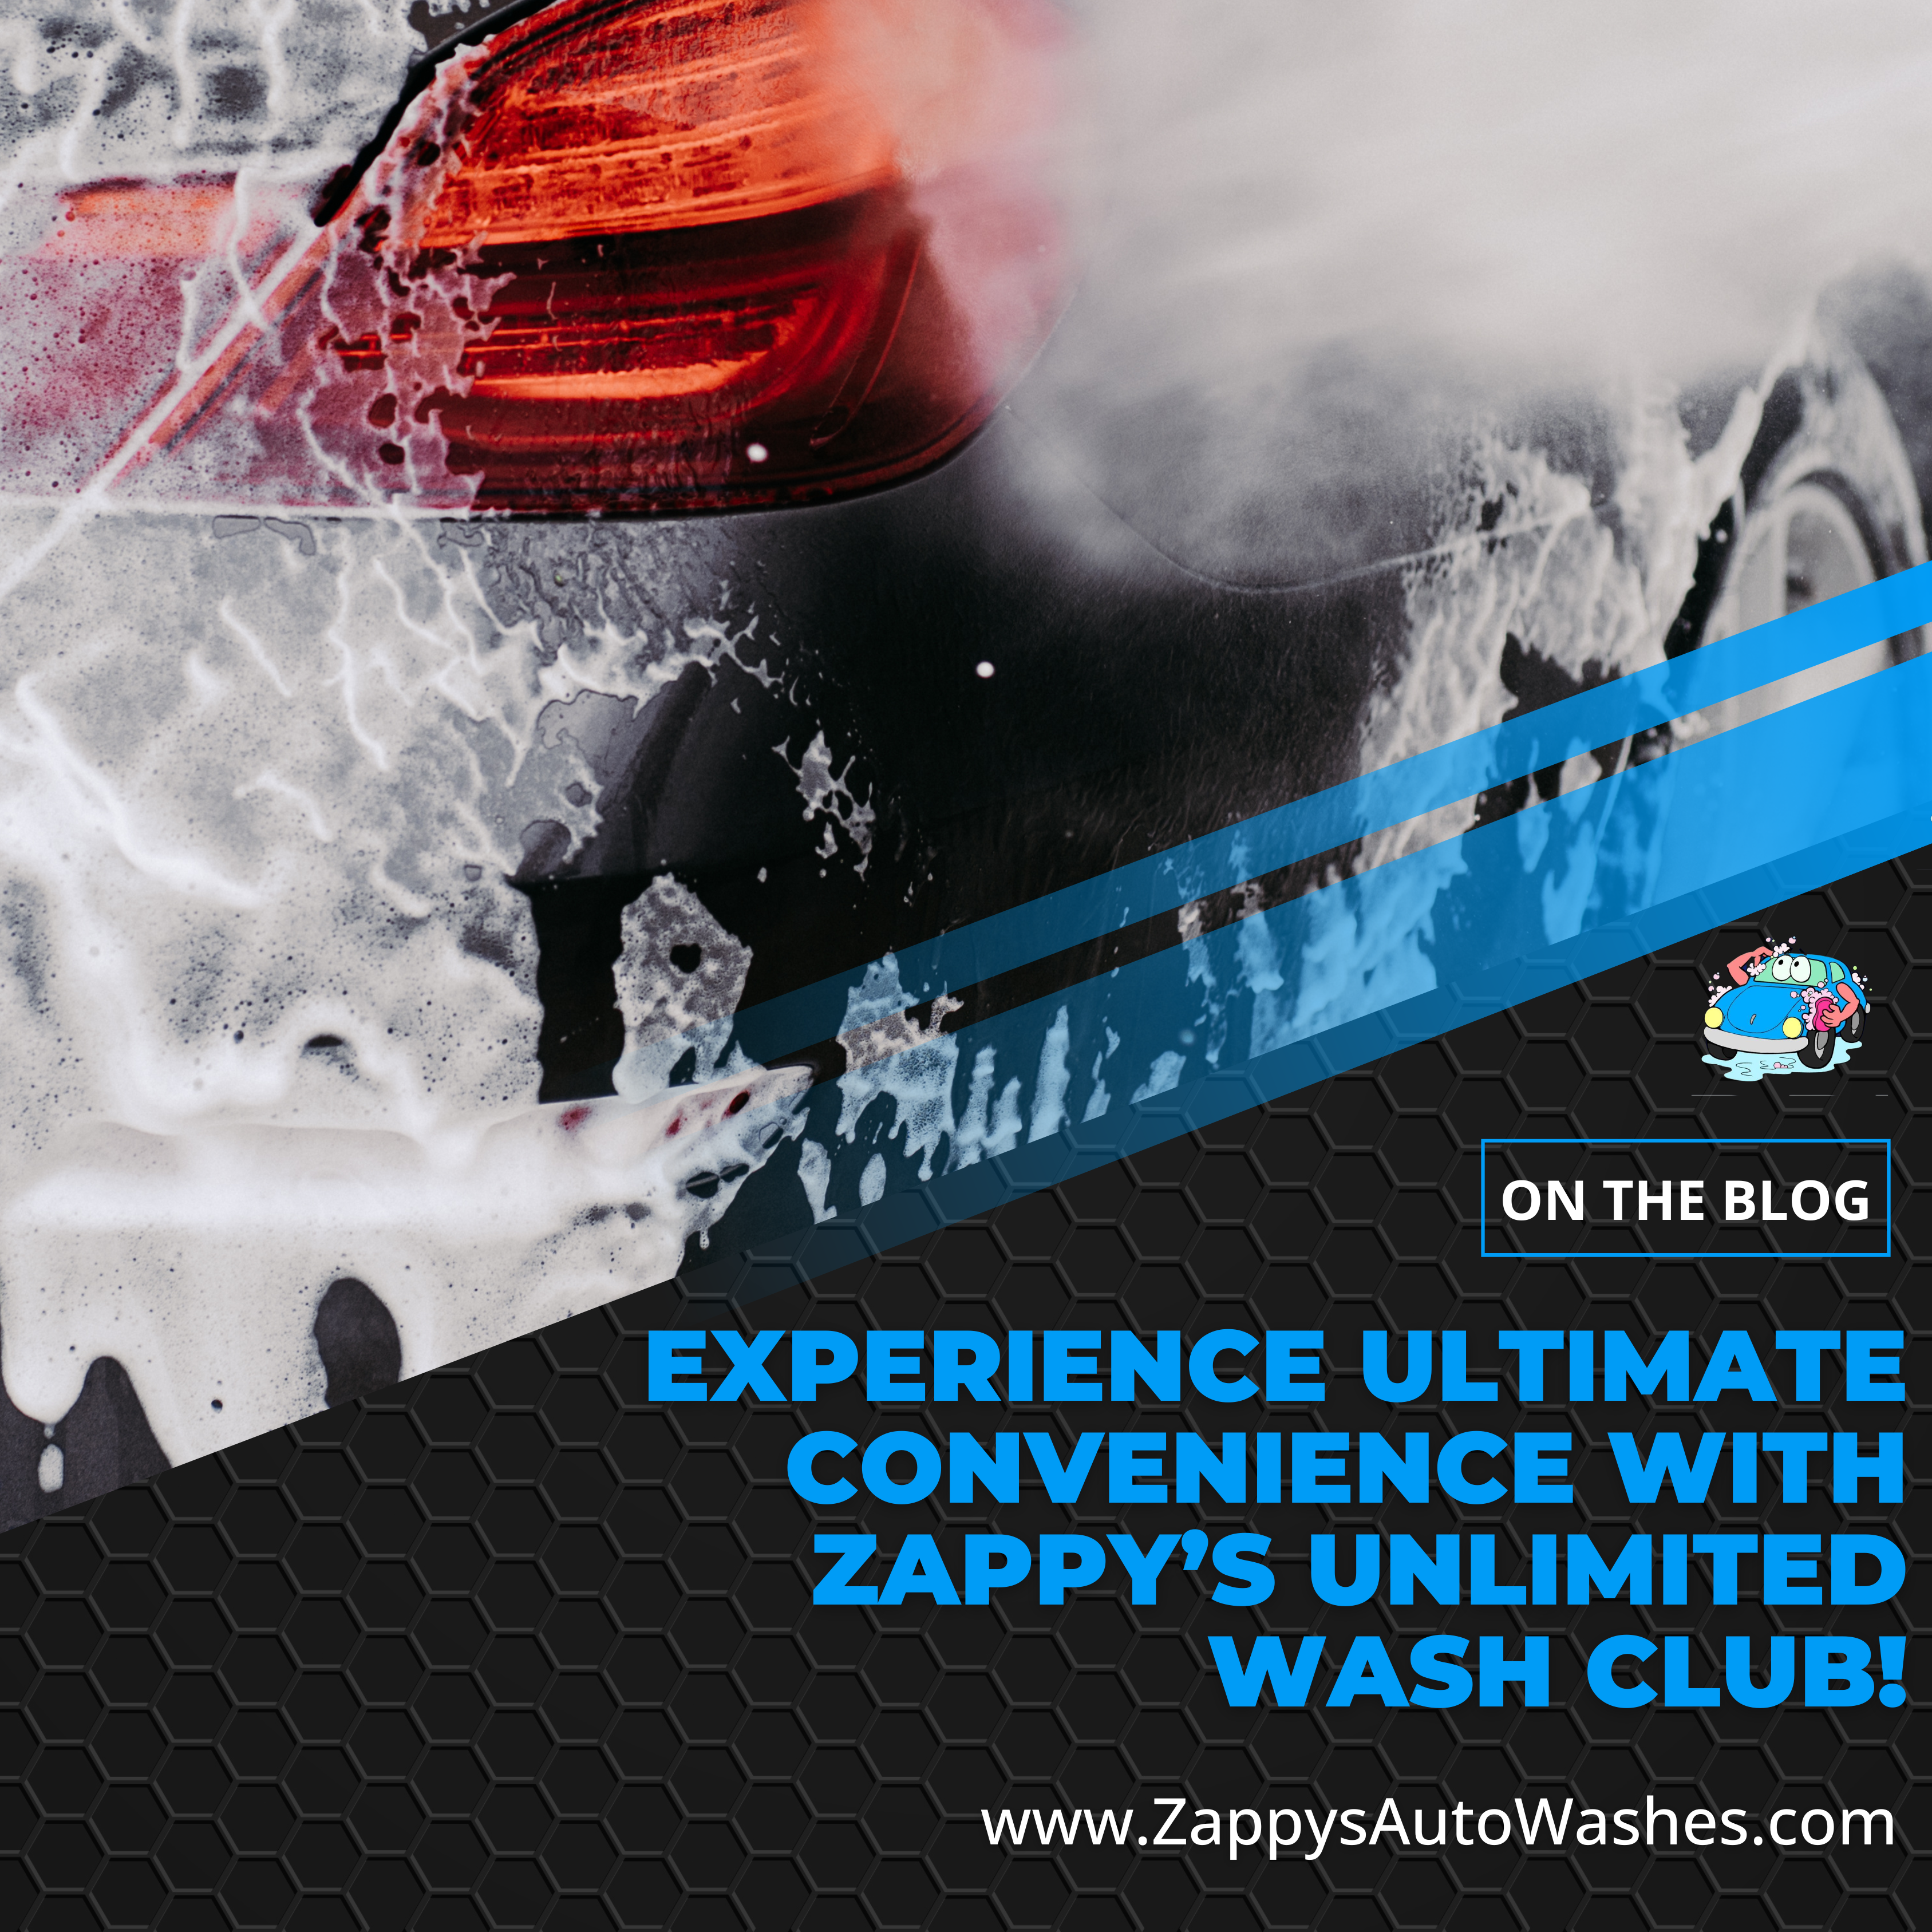 Experience Ultimate Convenience with Zappy's Auto Washes Unlimited Wash Club!